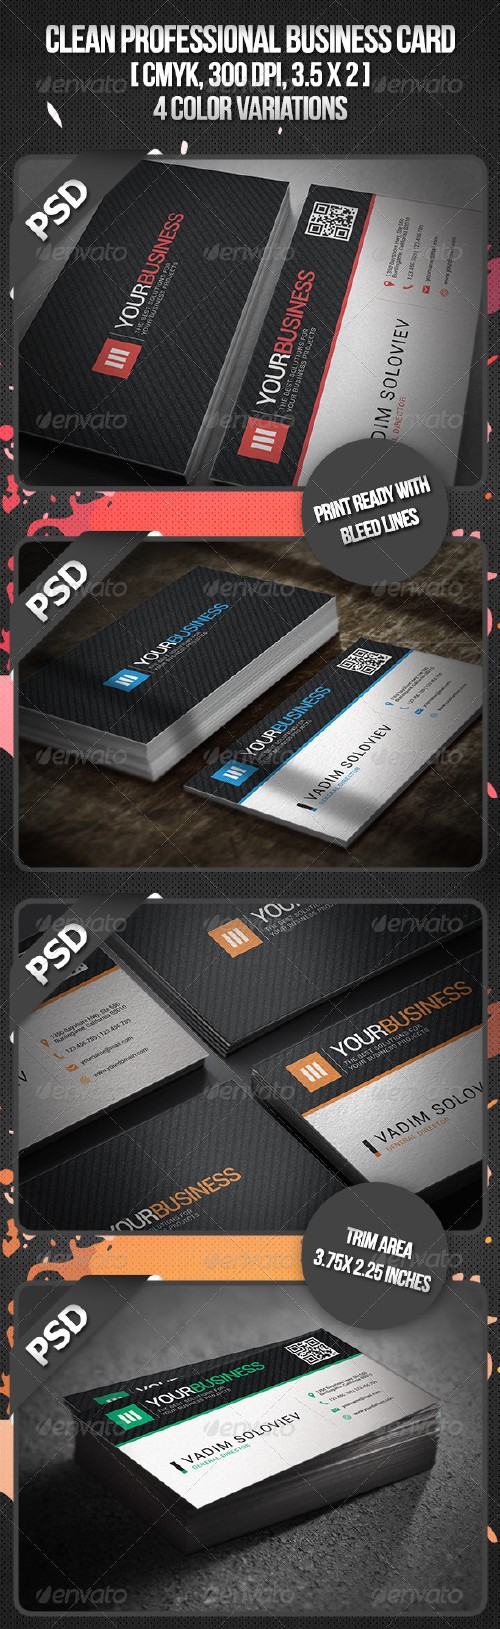 GraphicRiver Clean Professional Business Card 3058128